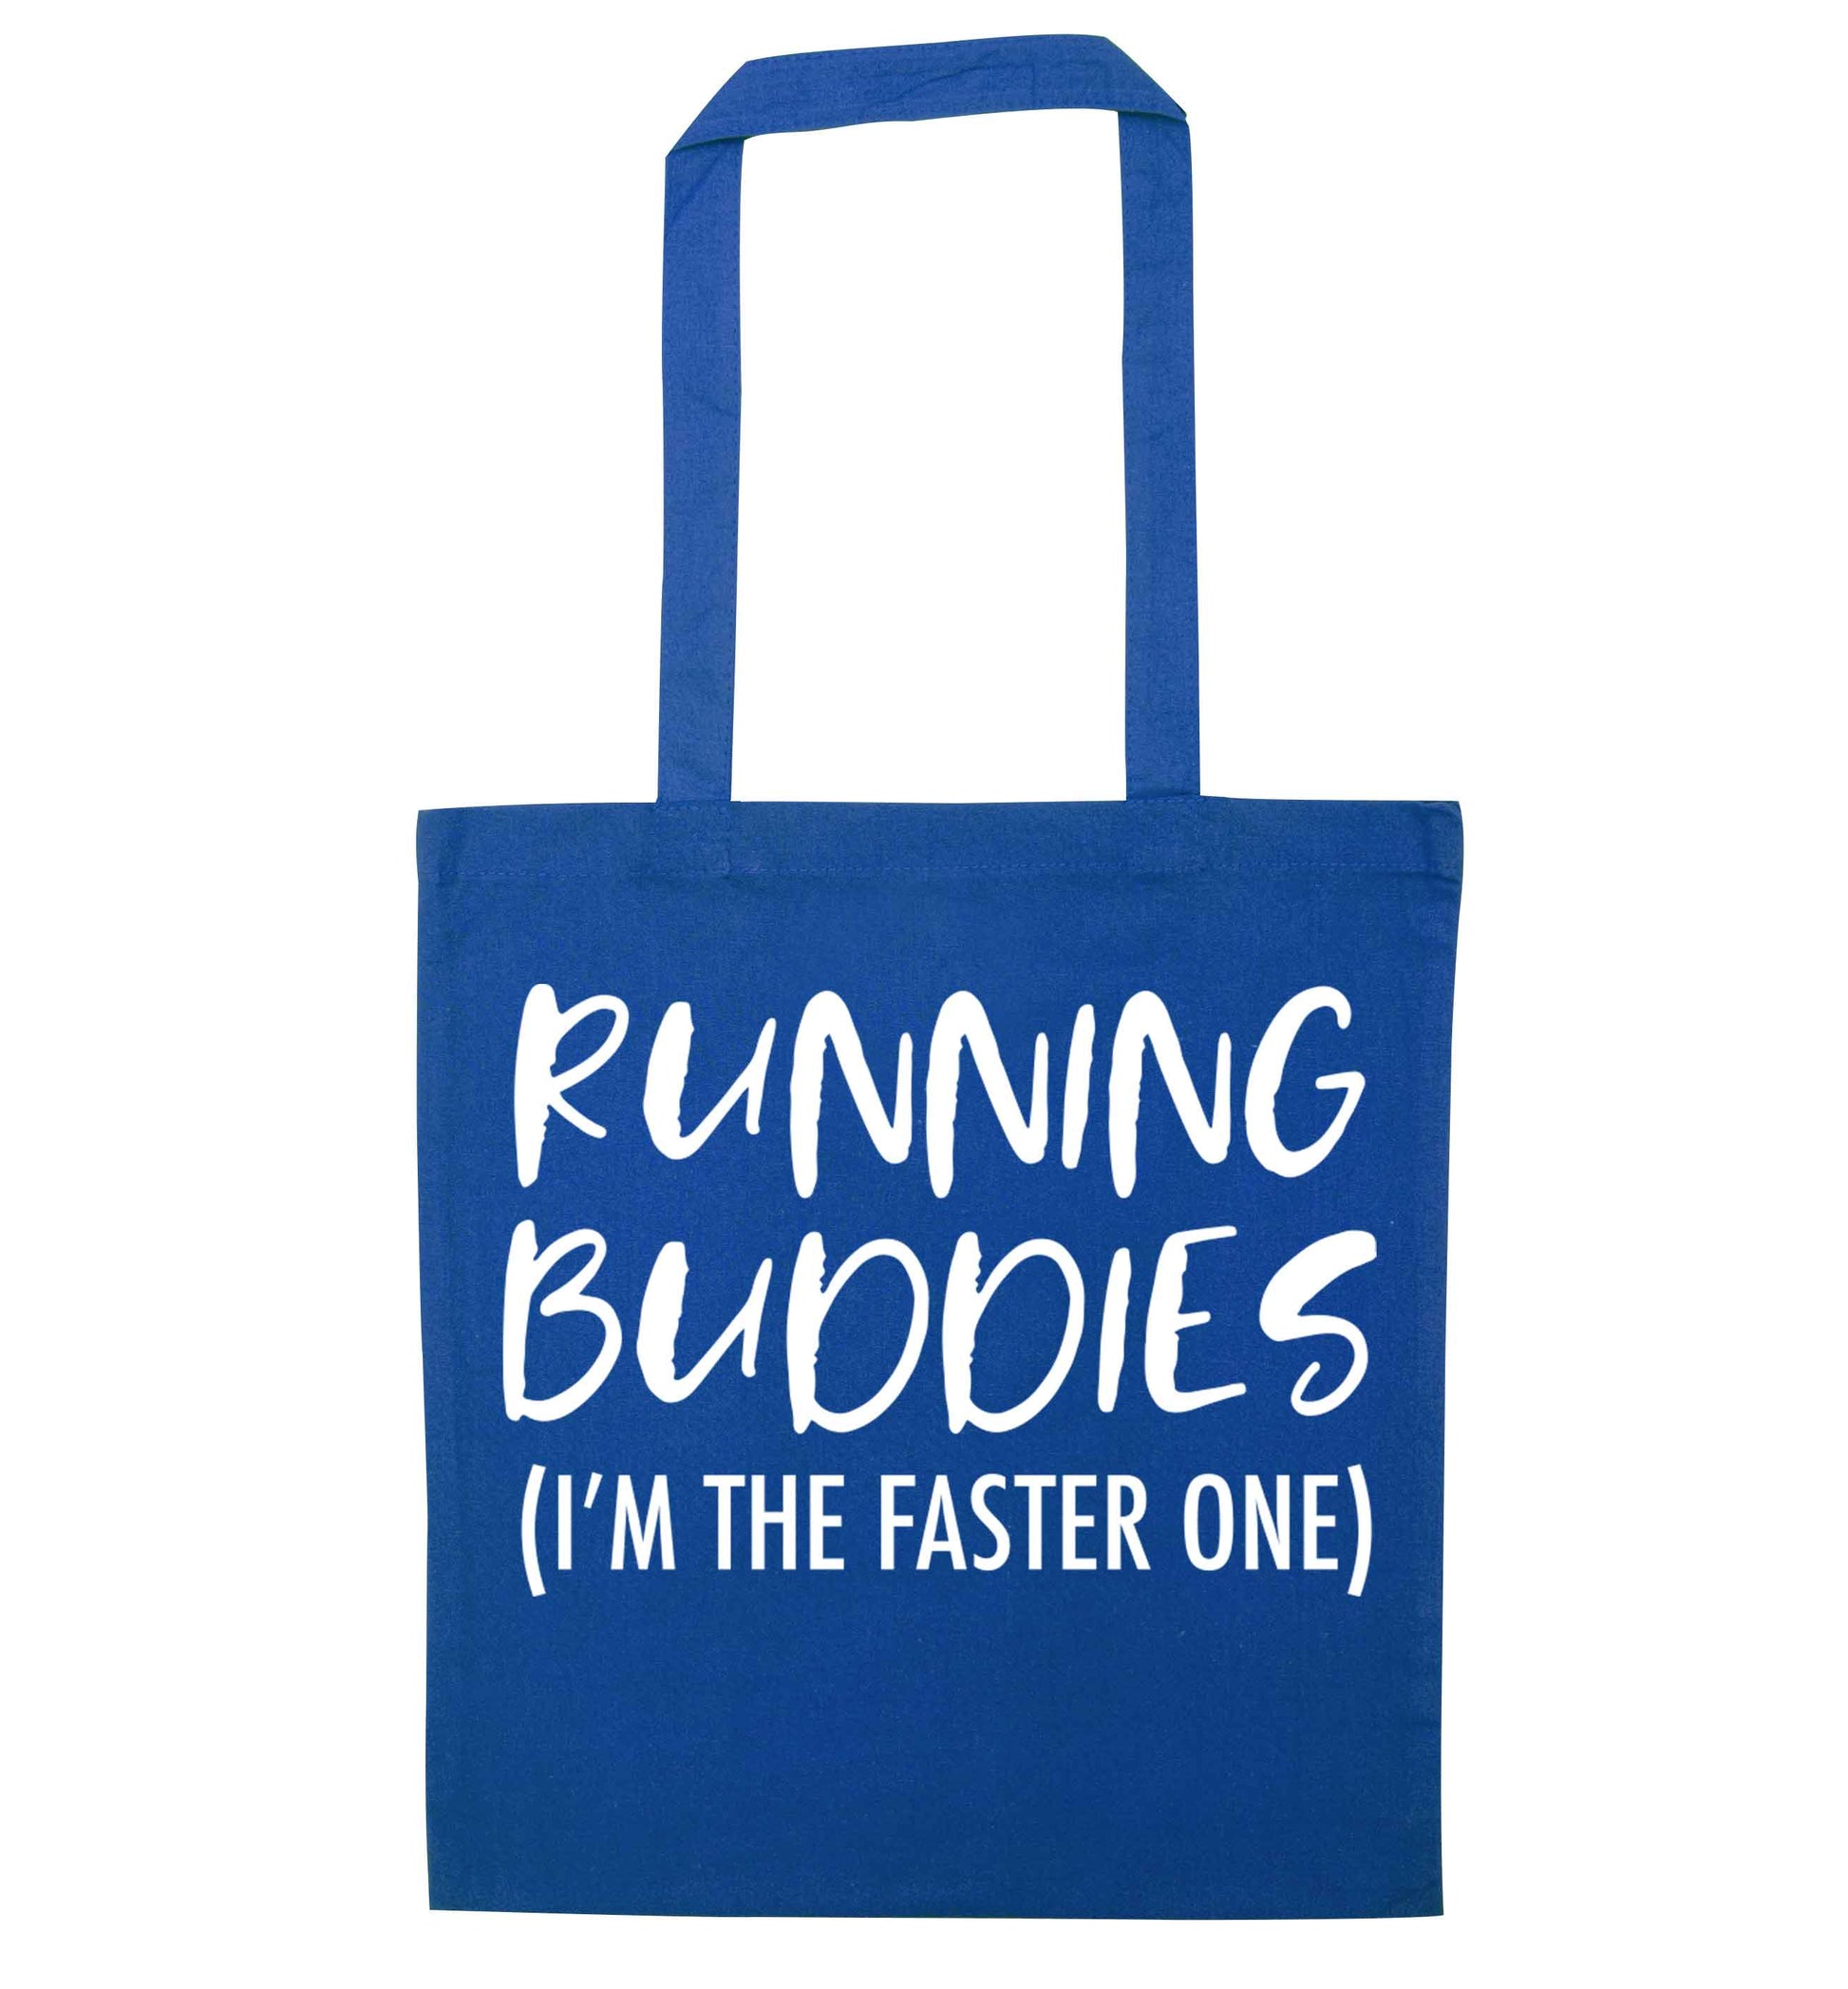 Running buddies (I'm the faster one) blue tote bag